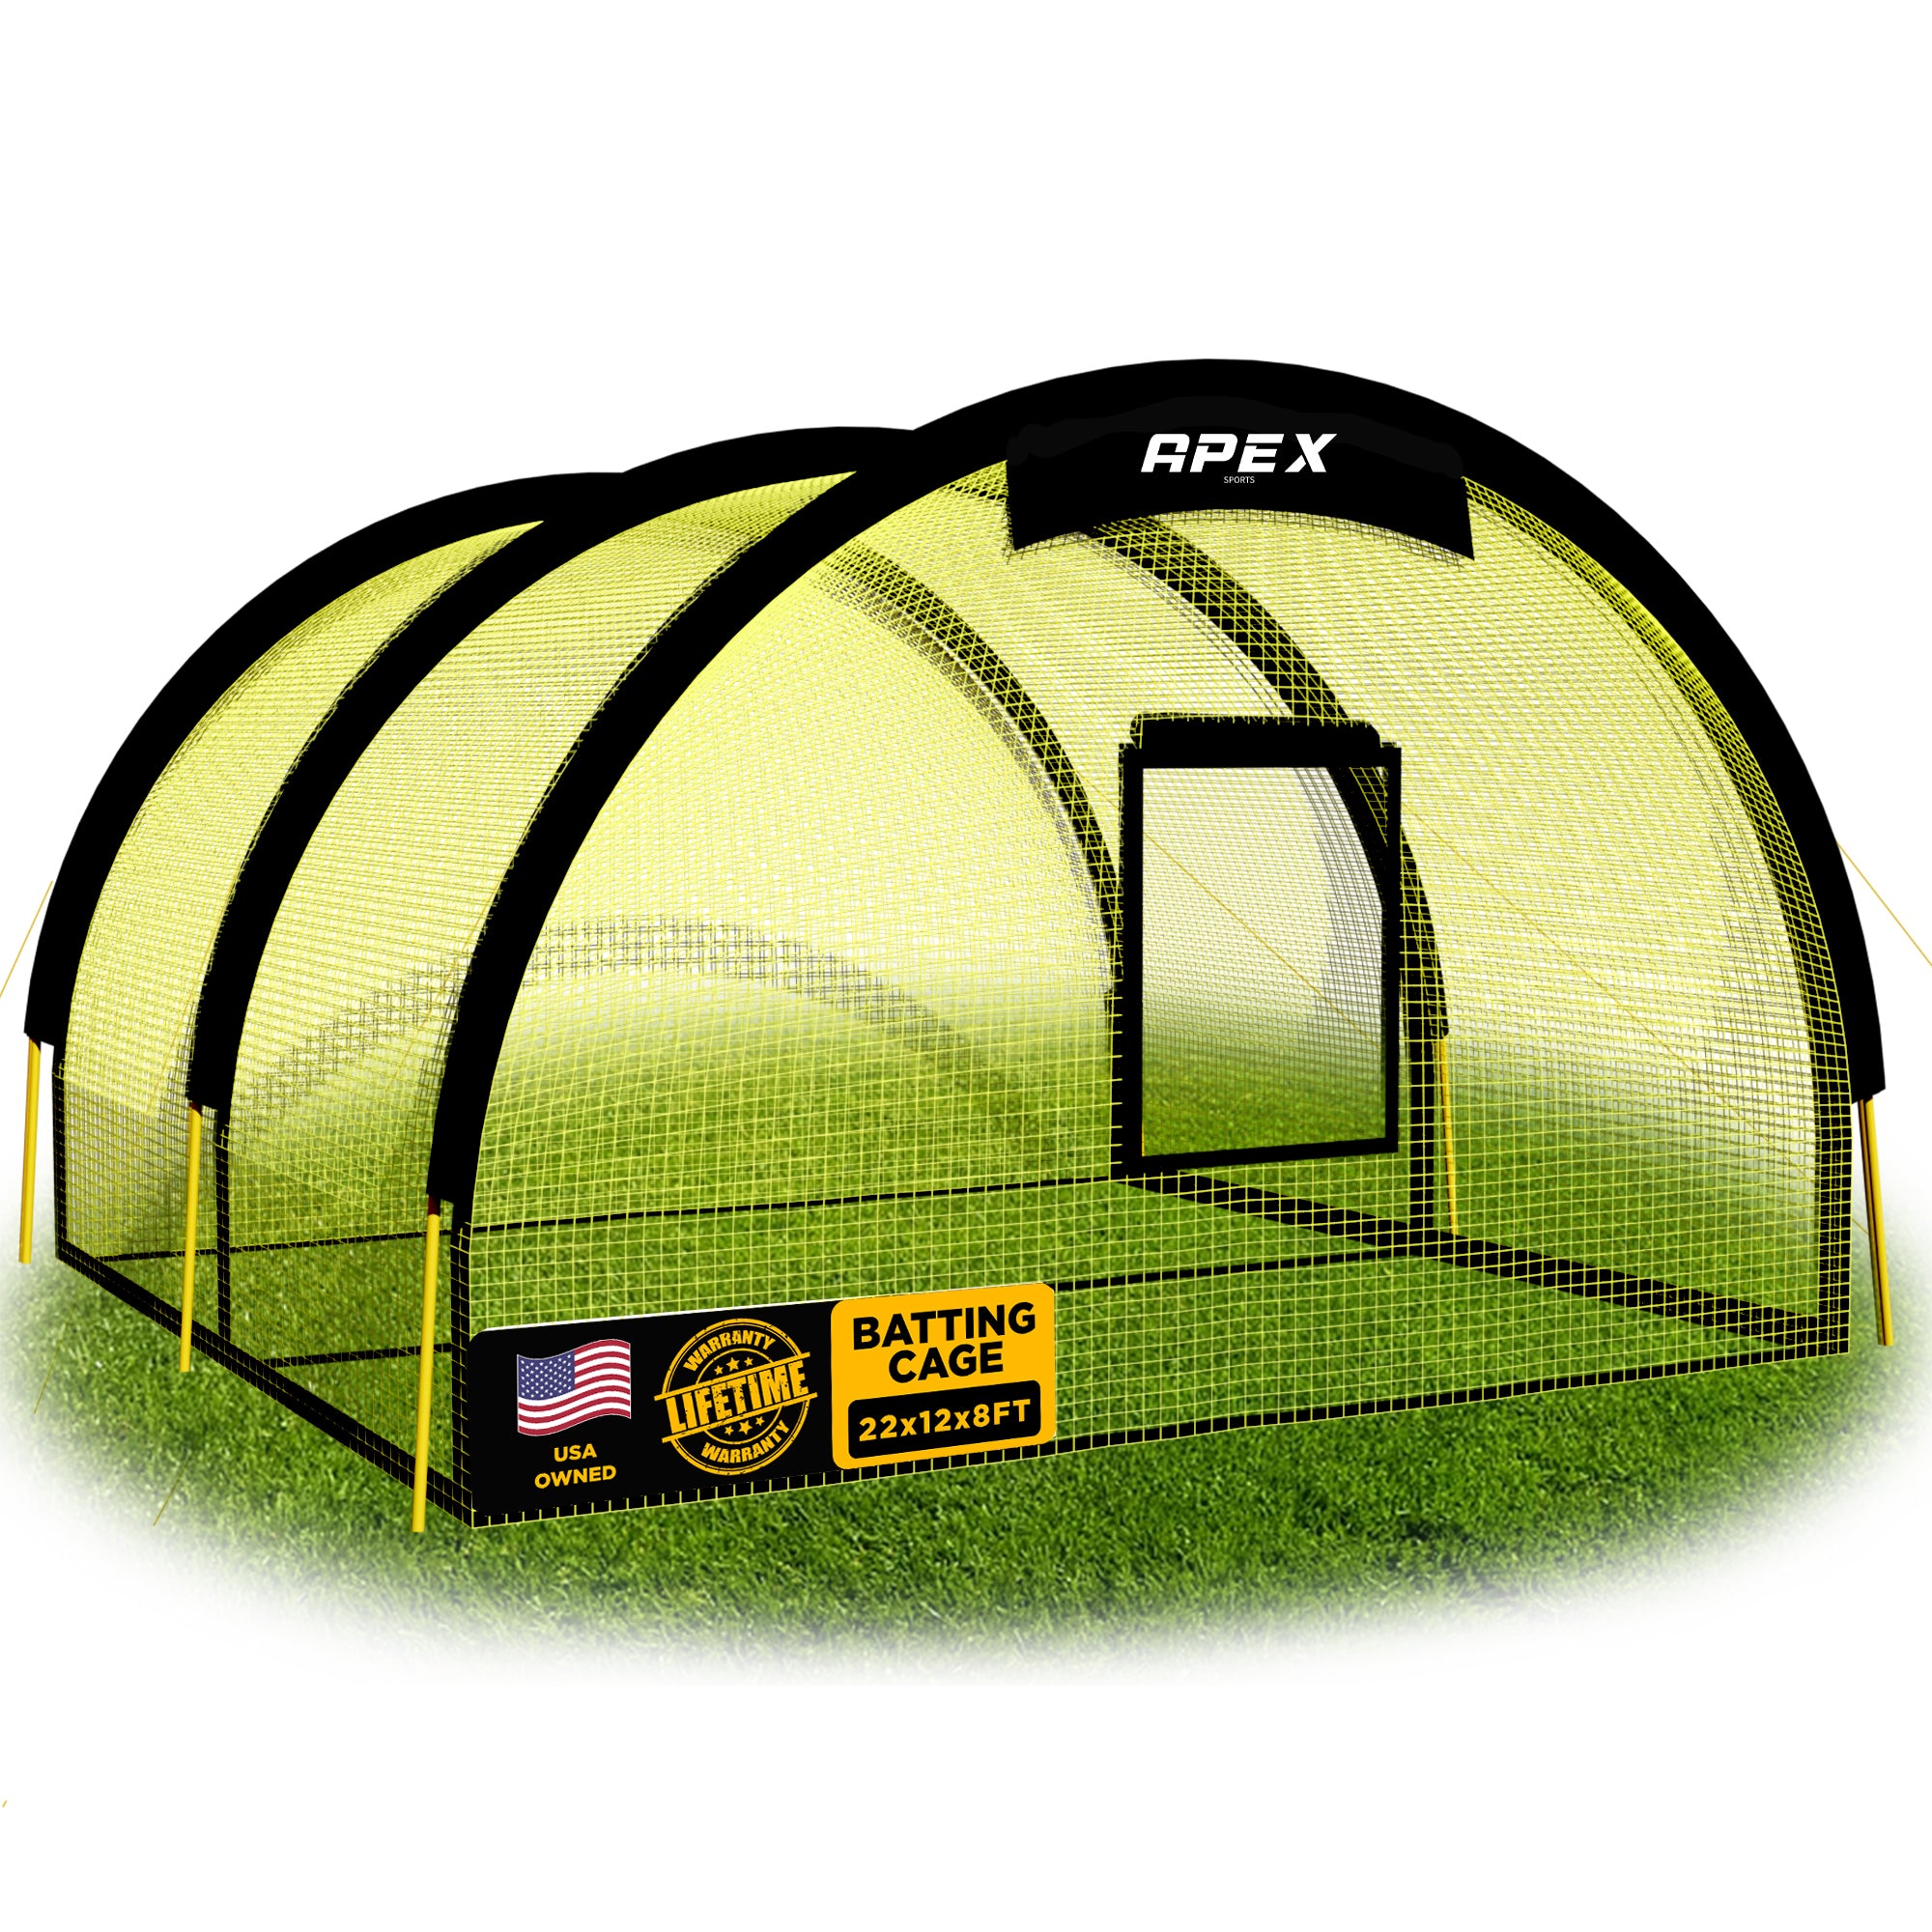 Apex Sports Batting Cage 22ft x 12ft x 8ft